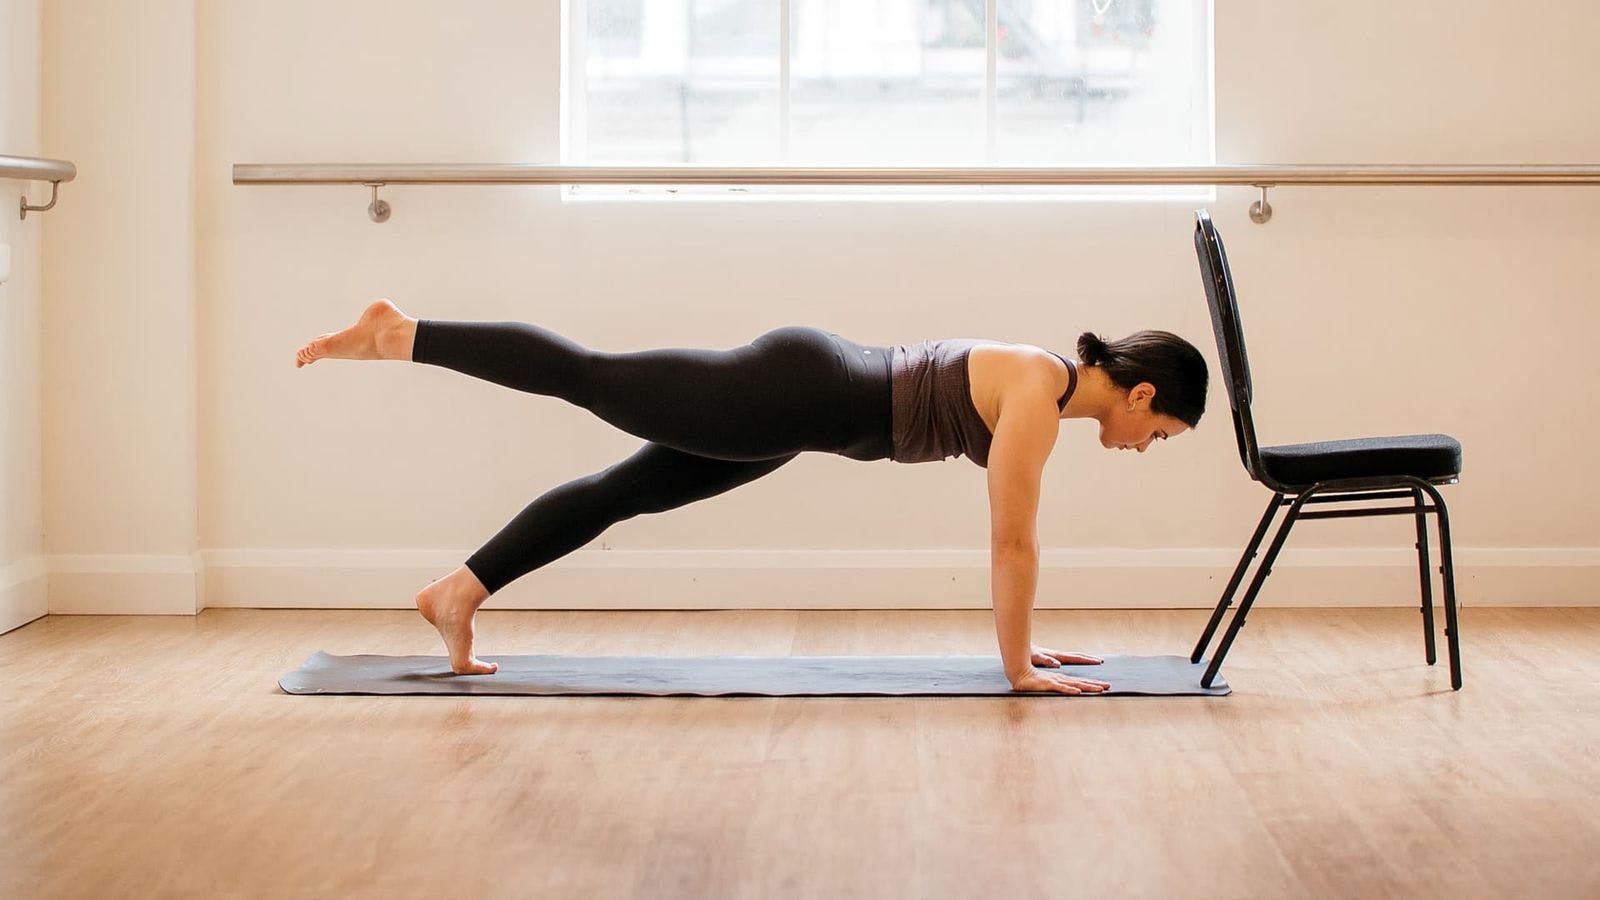 Love a strong barre workout? Look no further than Barre Breakdown